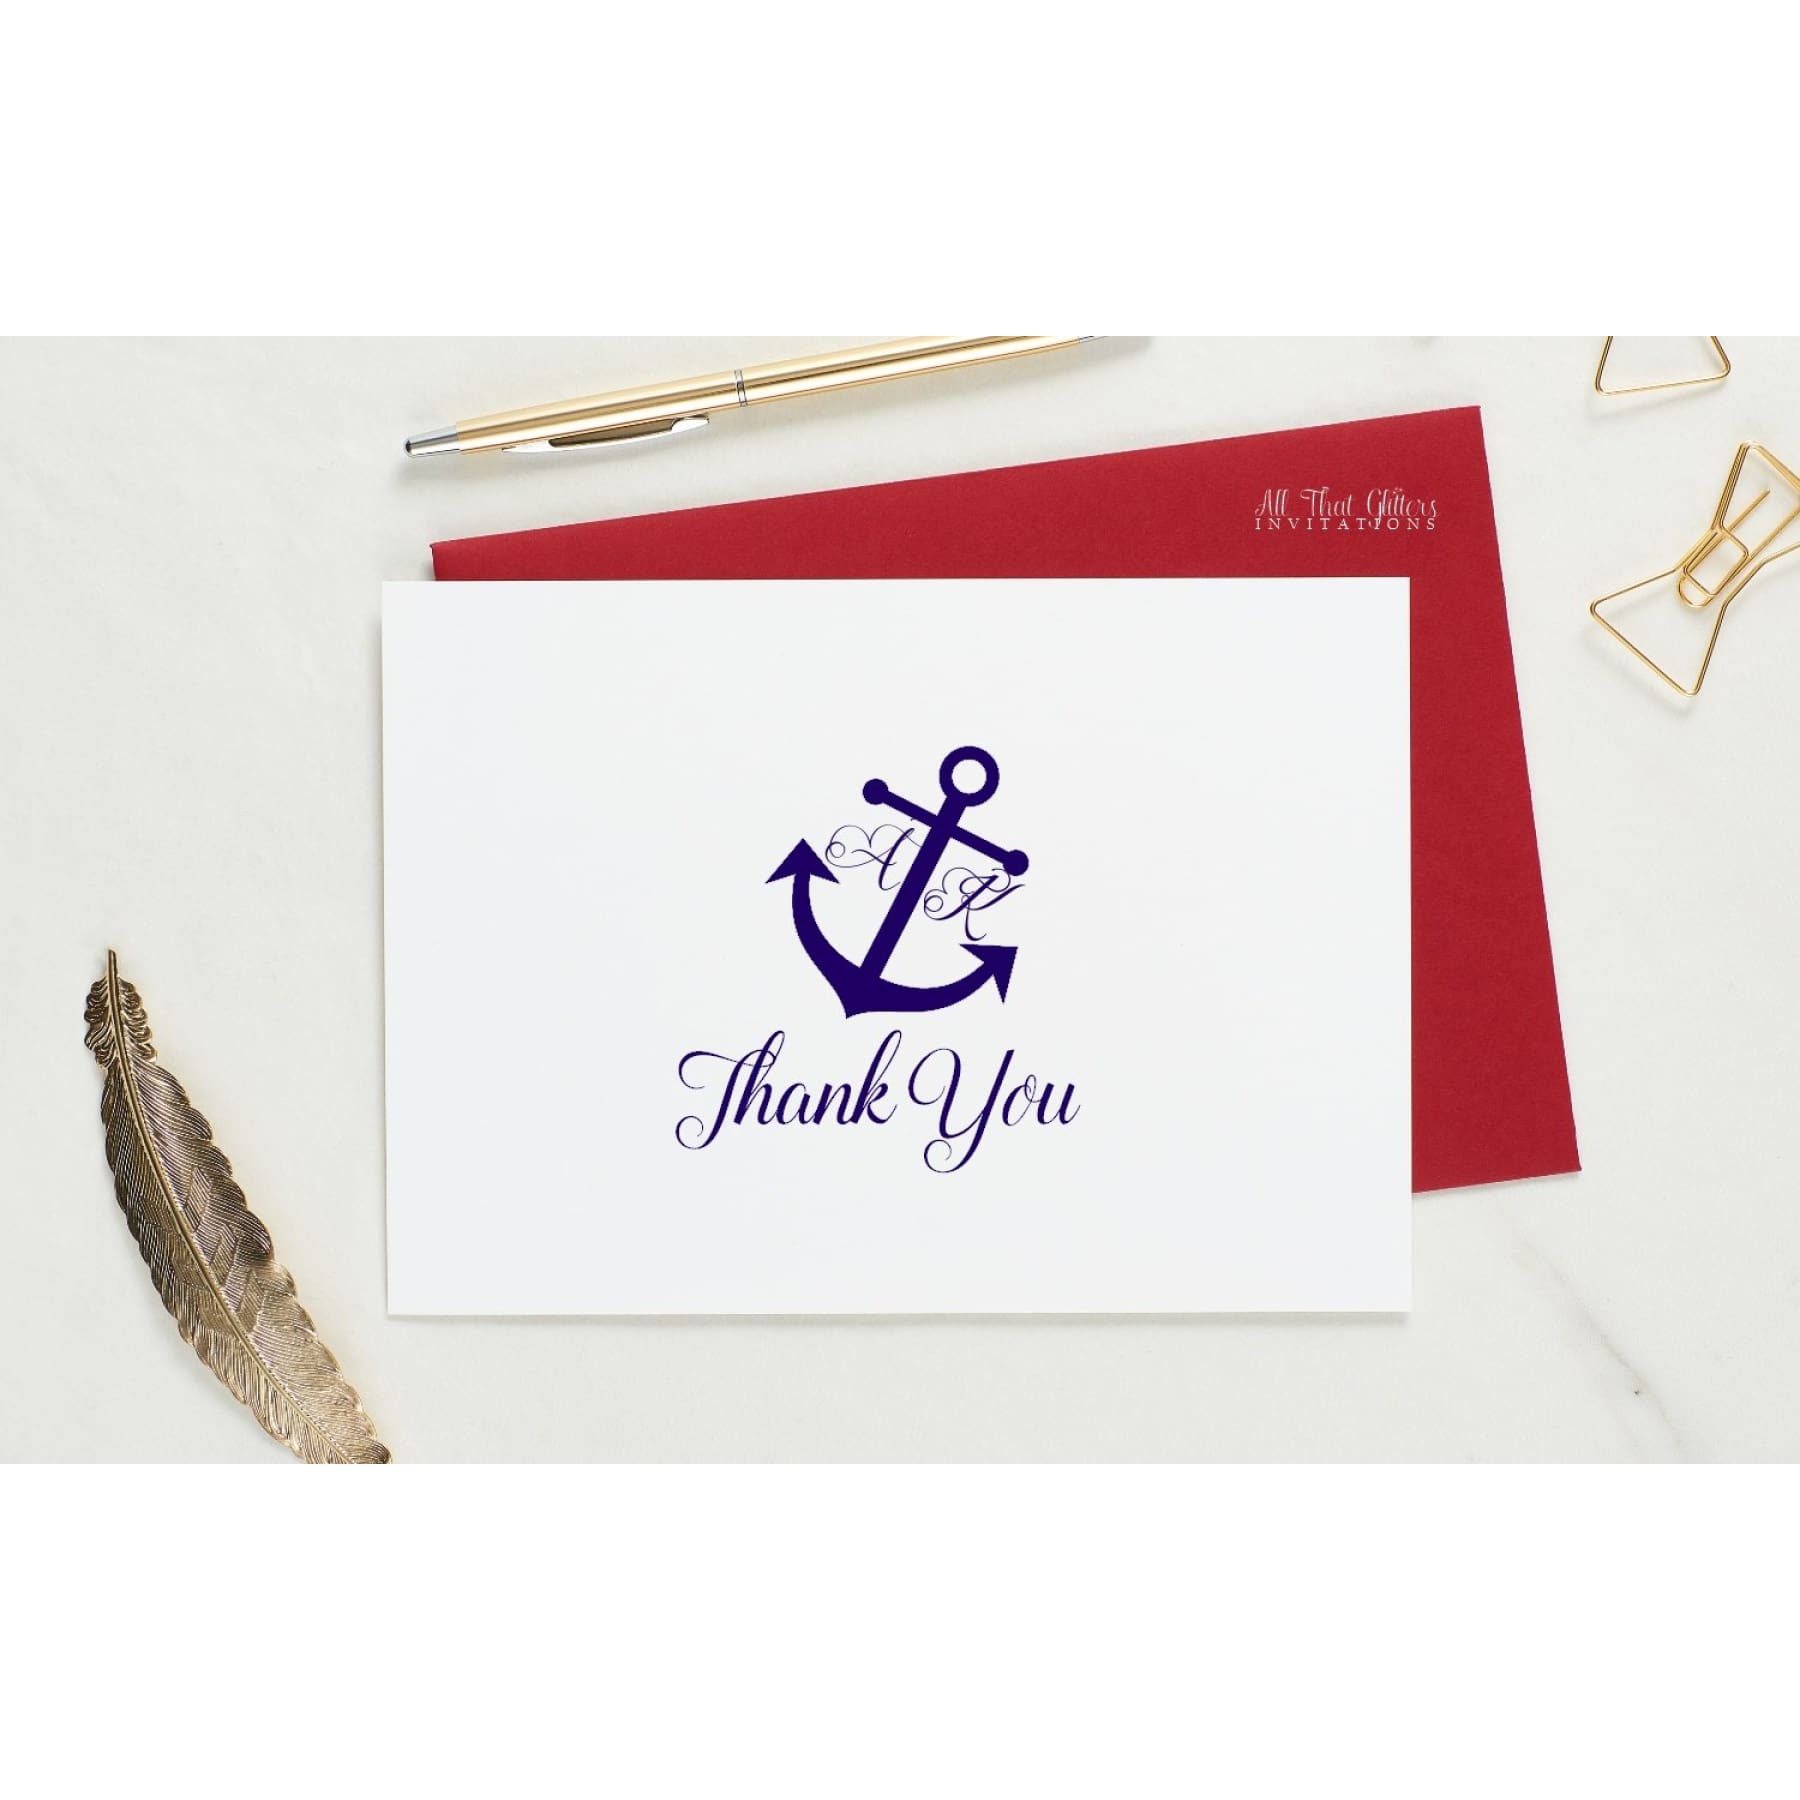 Folded Thank You Card, Ariana Style 1 - All That Glitters Invitations